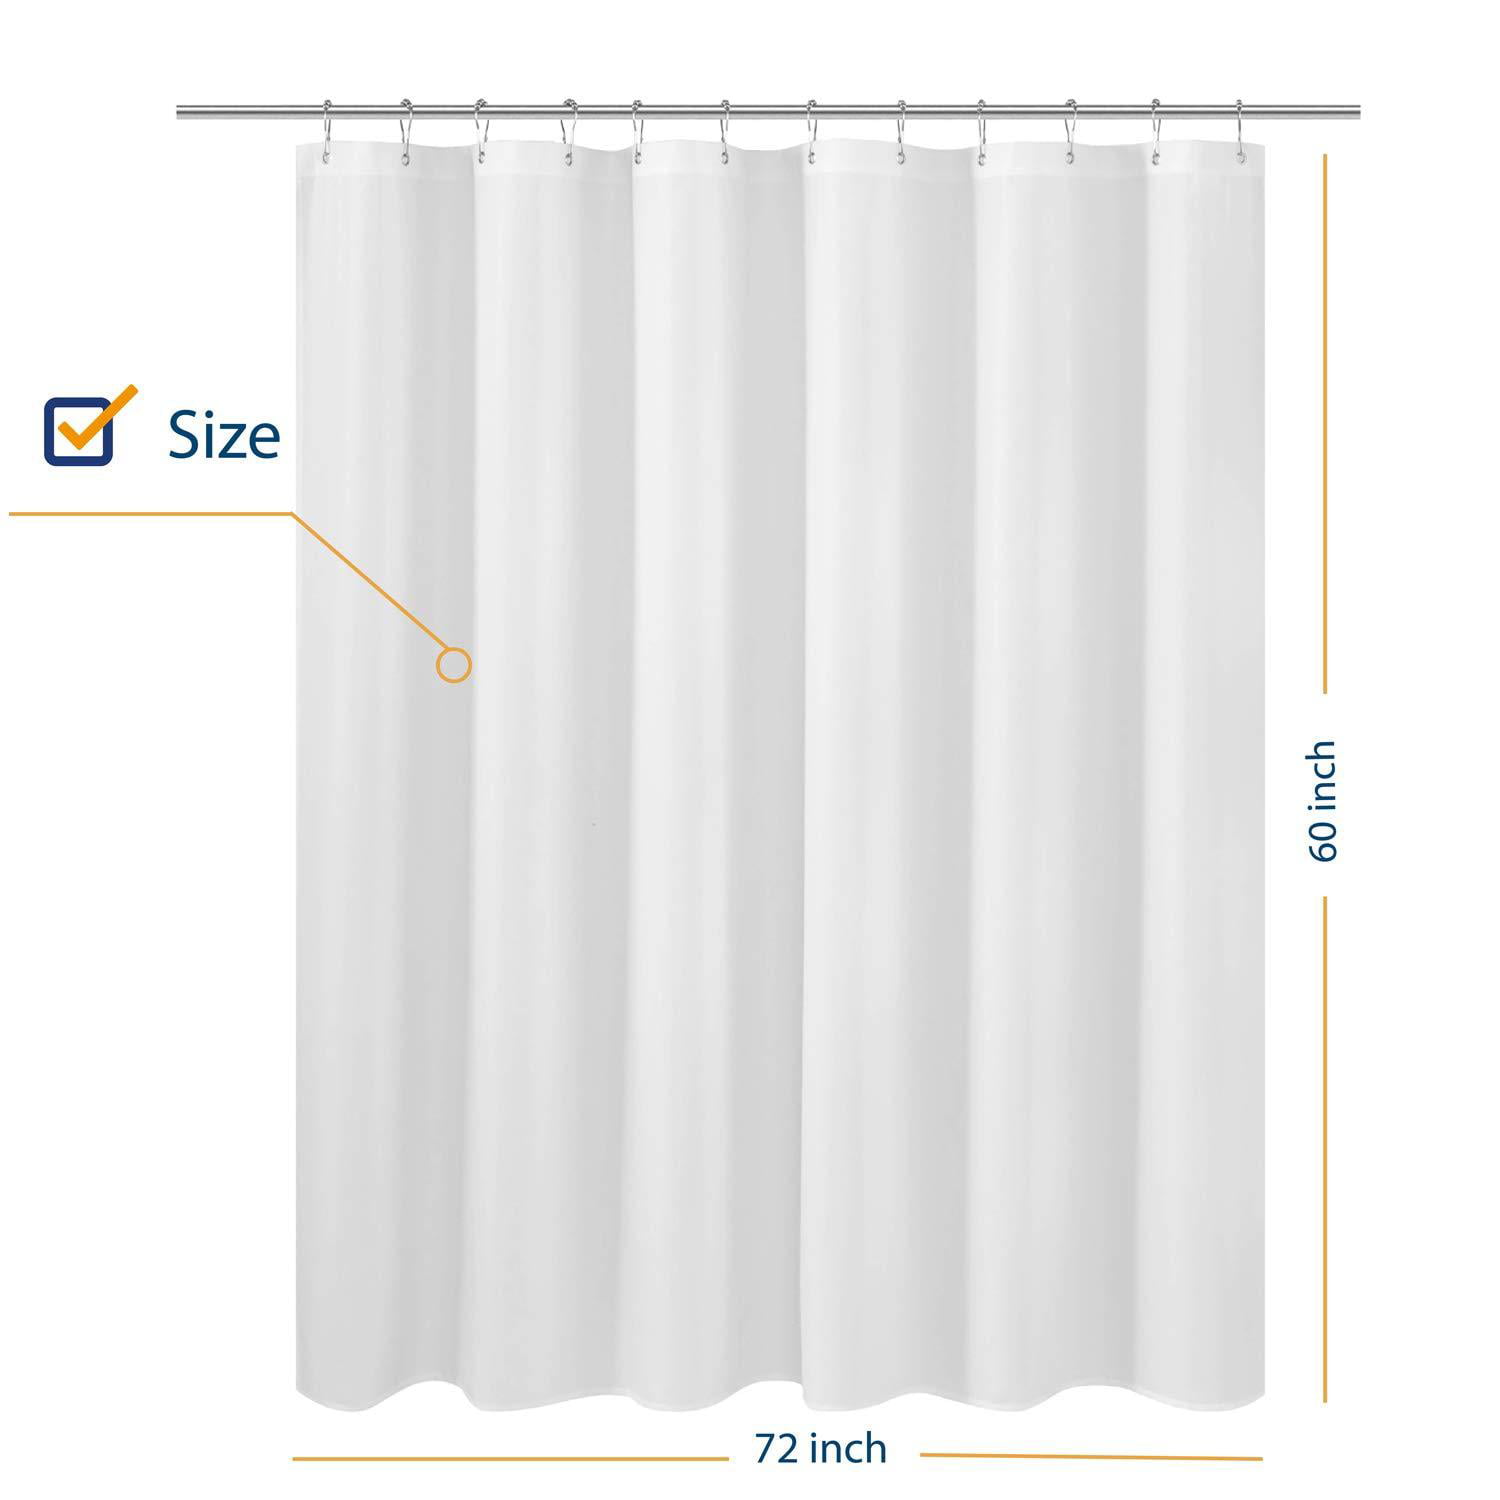 Fabric Shower Curtain Liner, What Size Shower Curtains Are There